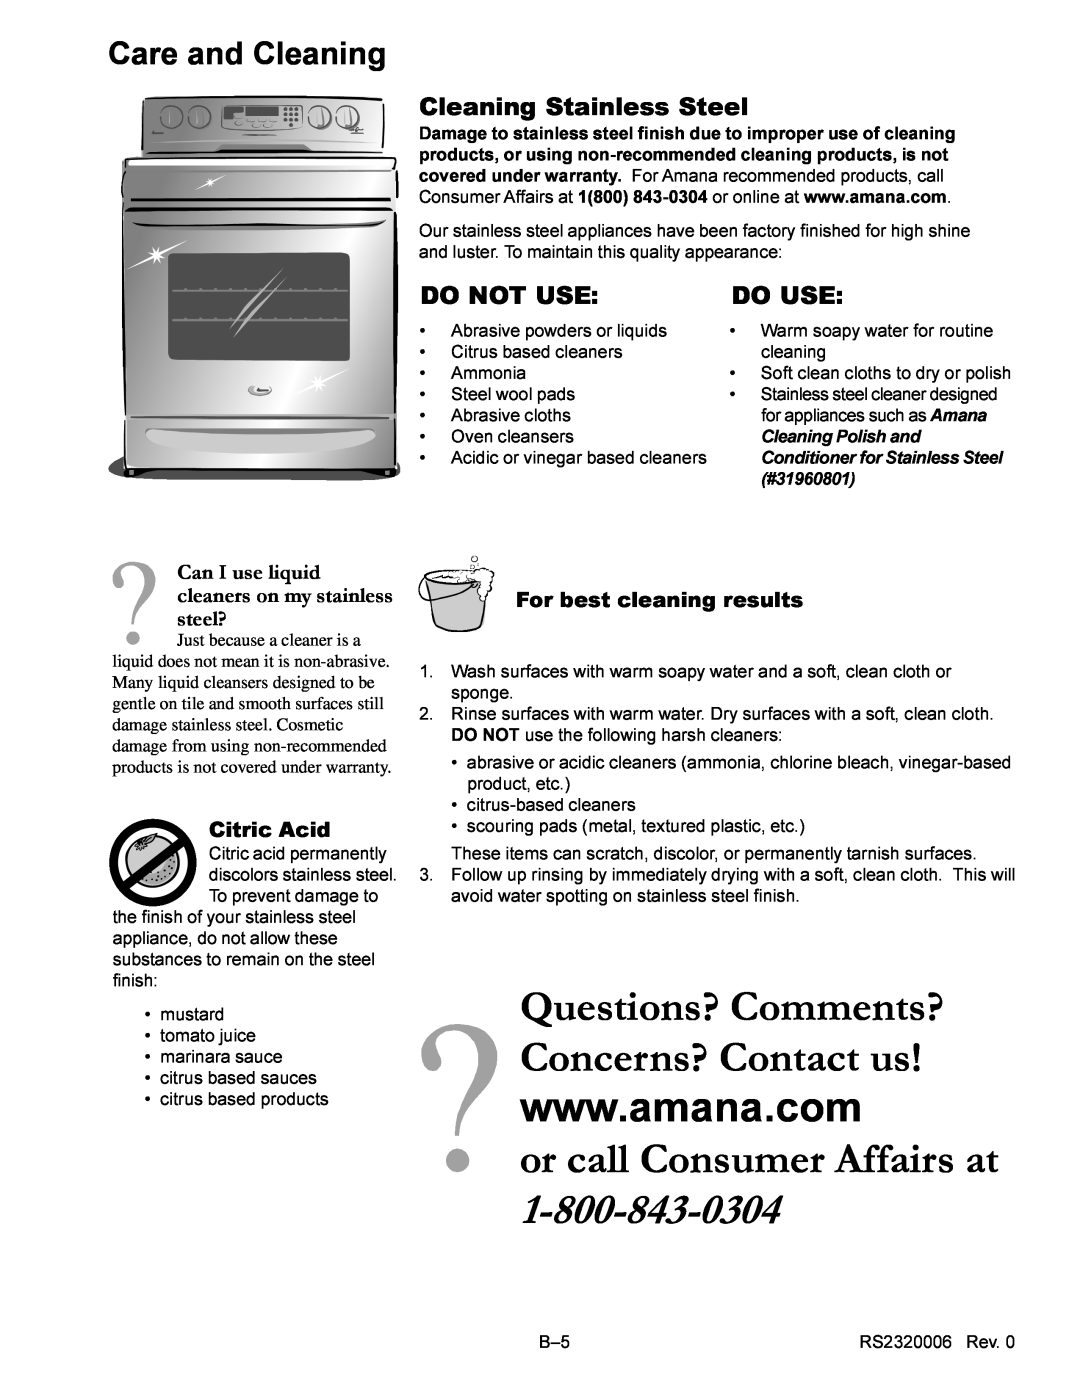 Amana RS2320006 or call Consumer Affairs at, Cleaning Stainless Steel, Do Not Use, Do Use, Citric Acid, Care and Cleaning 